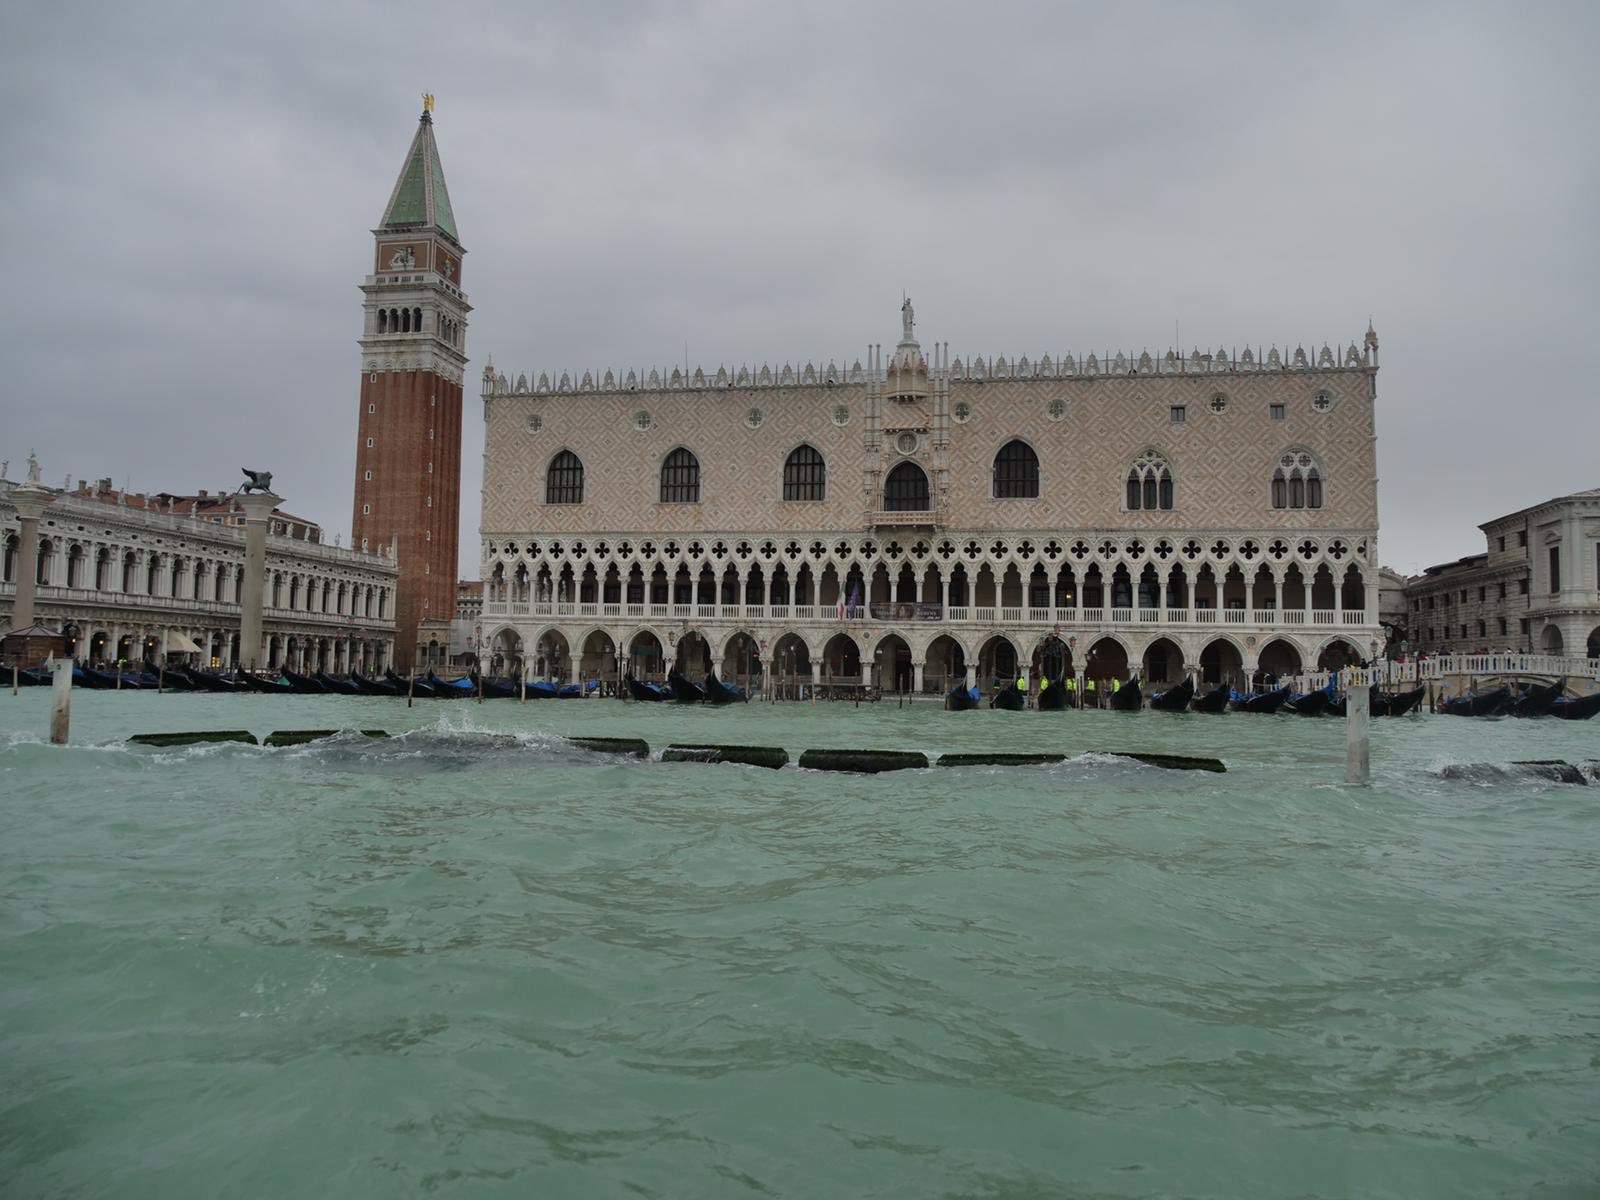 Venice, high water again today, touched 154 cm, San Marco closed. City opens account for aid